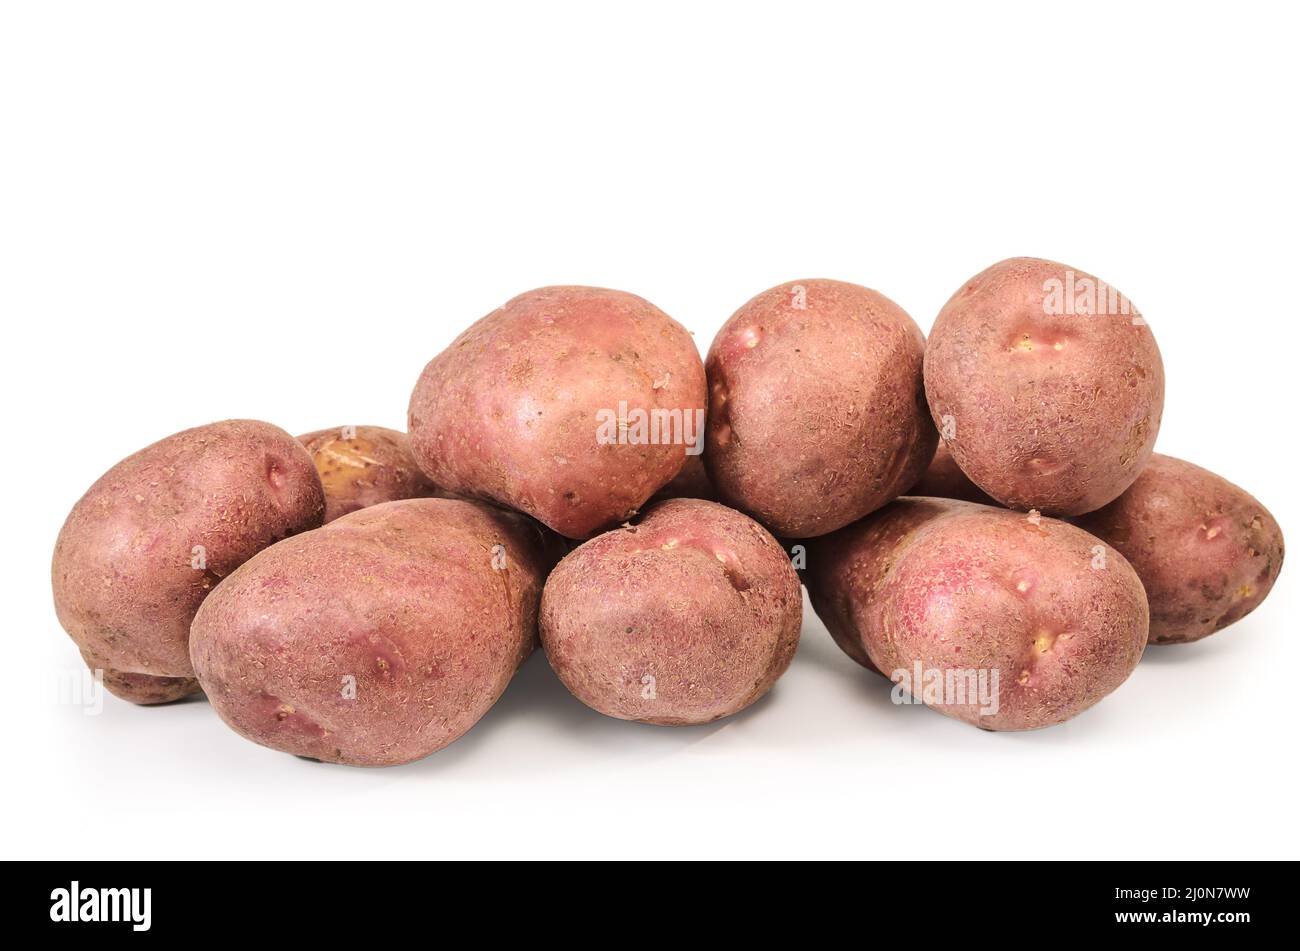 Ripe potatoes on white background with soft shadow Stock Photo